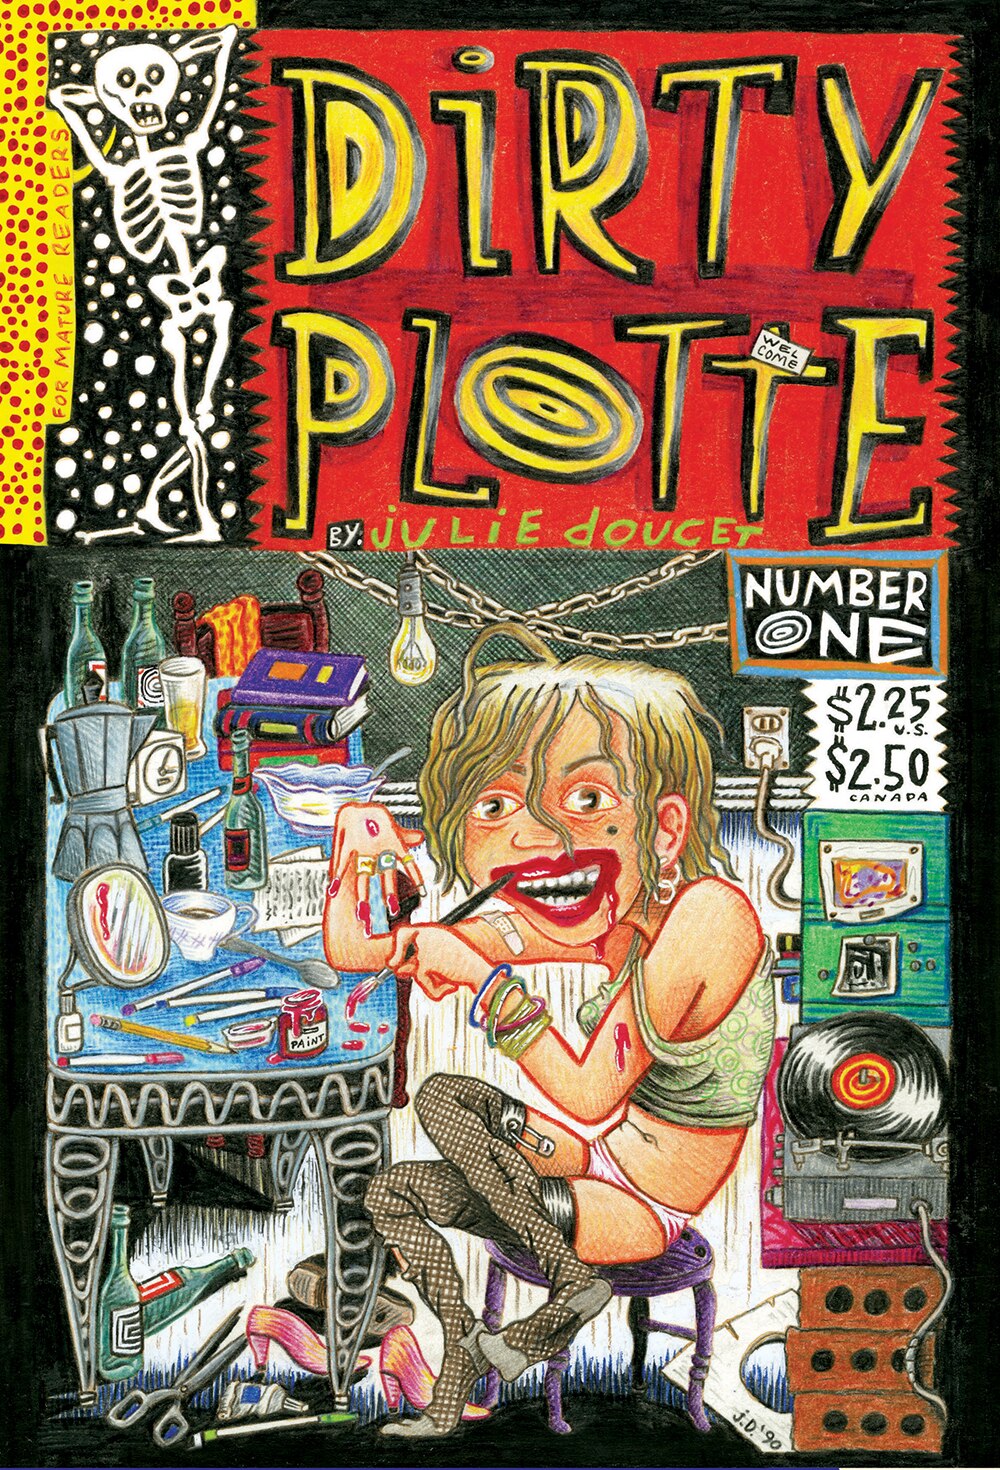 Book cover of Dirty Plotte by Julie Doucet (1991-1998)